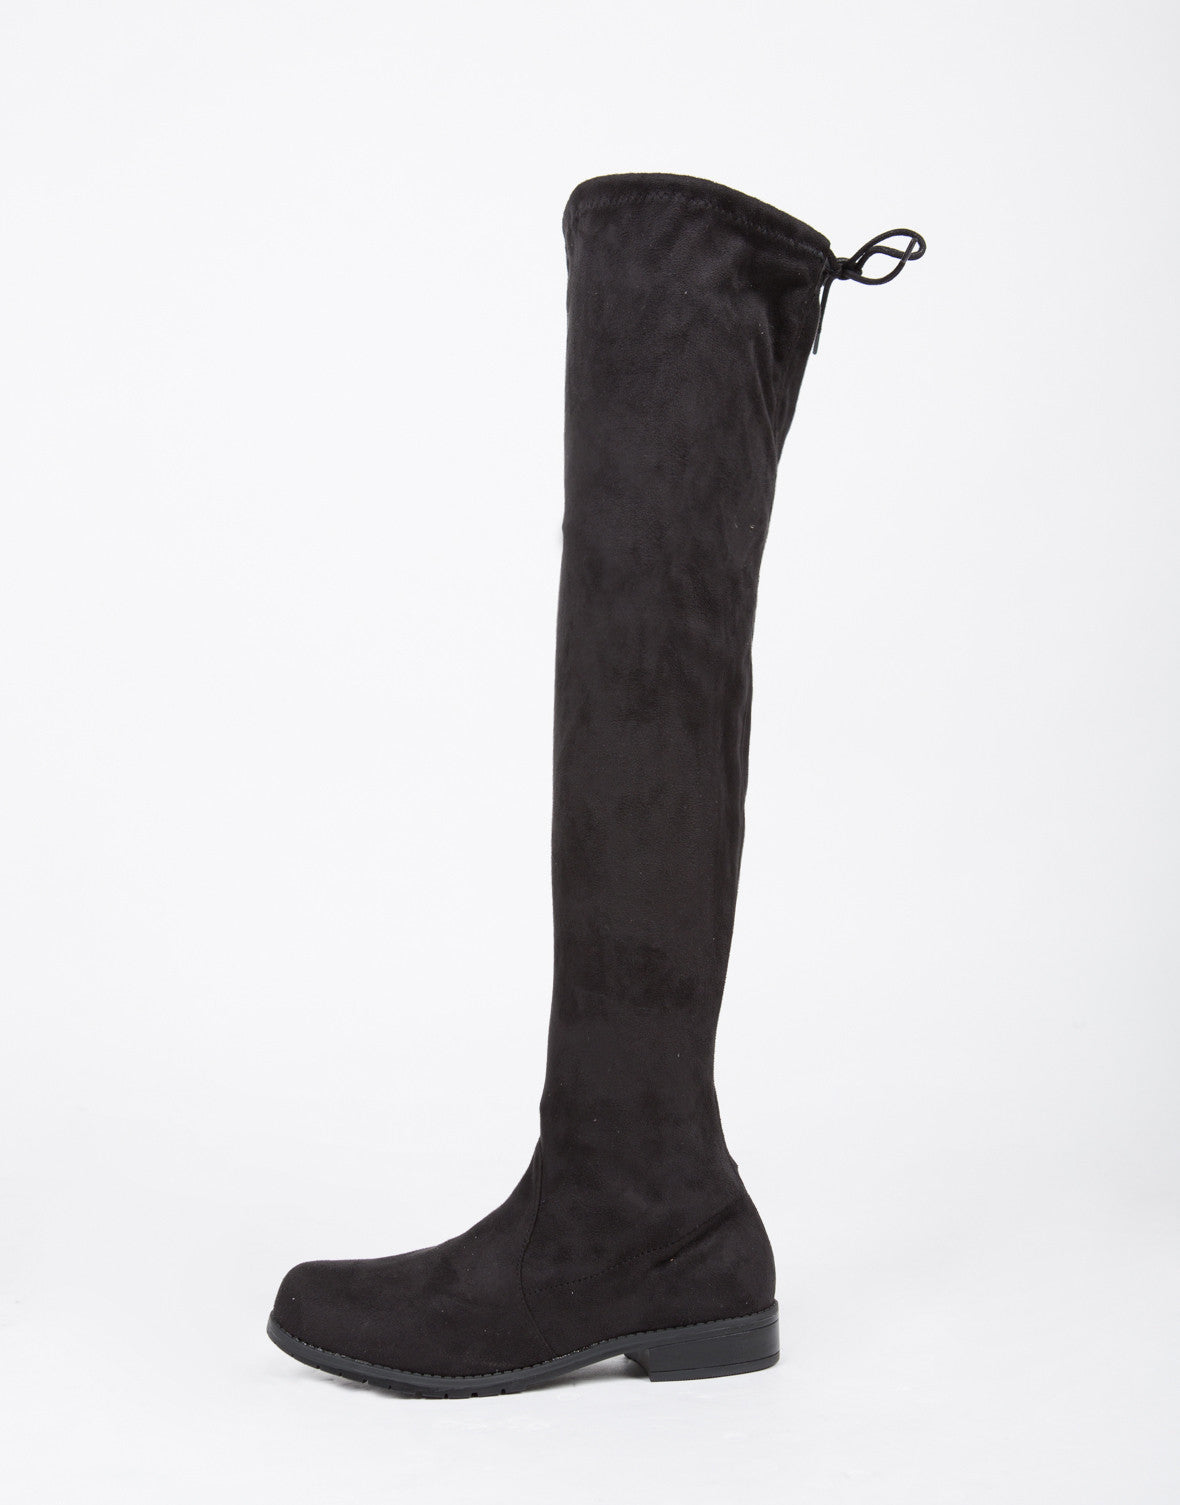 Drawstring Over-The-Knee Boots - Suede Knee Boots - Tall Back Tie Boots ...